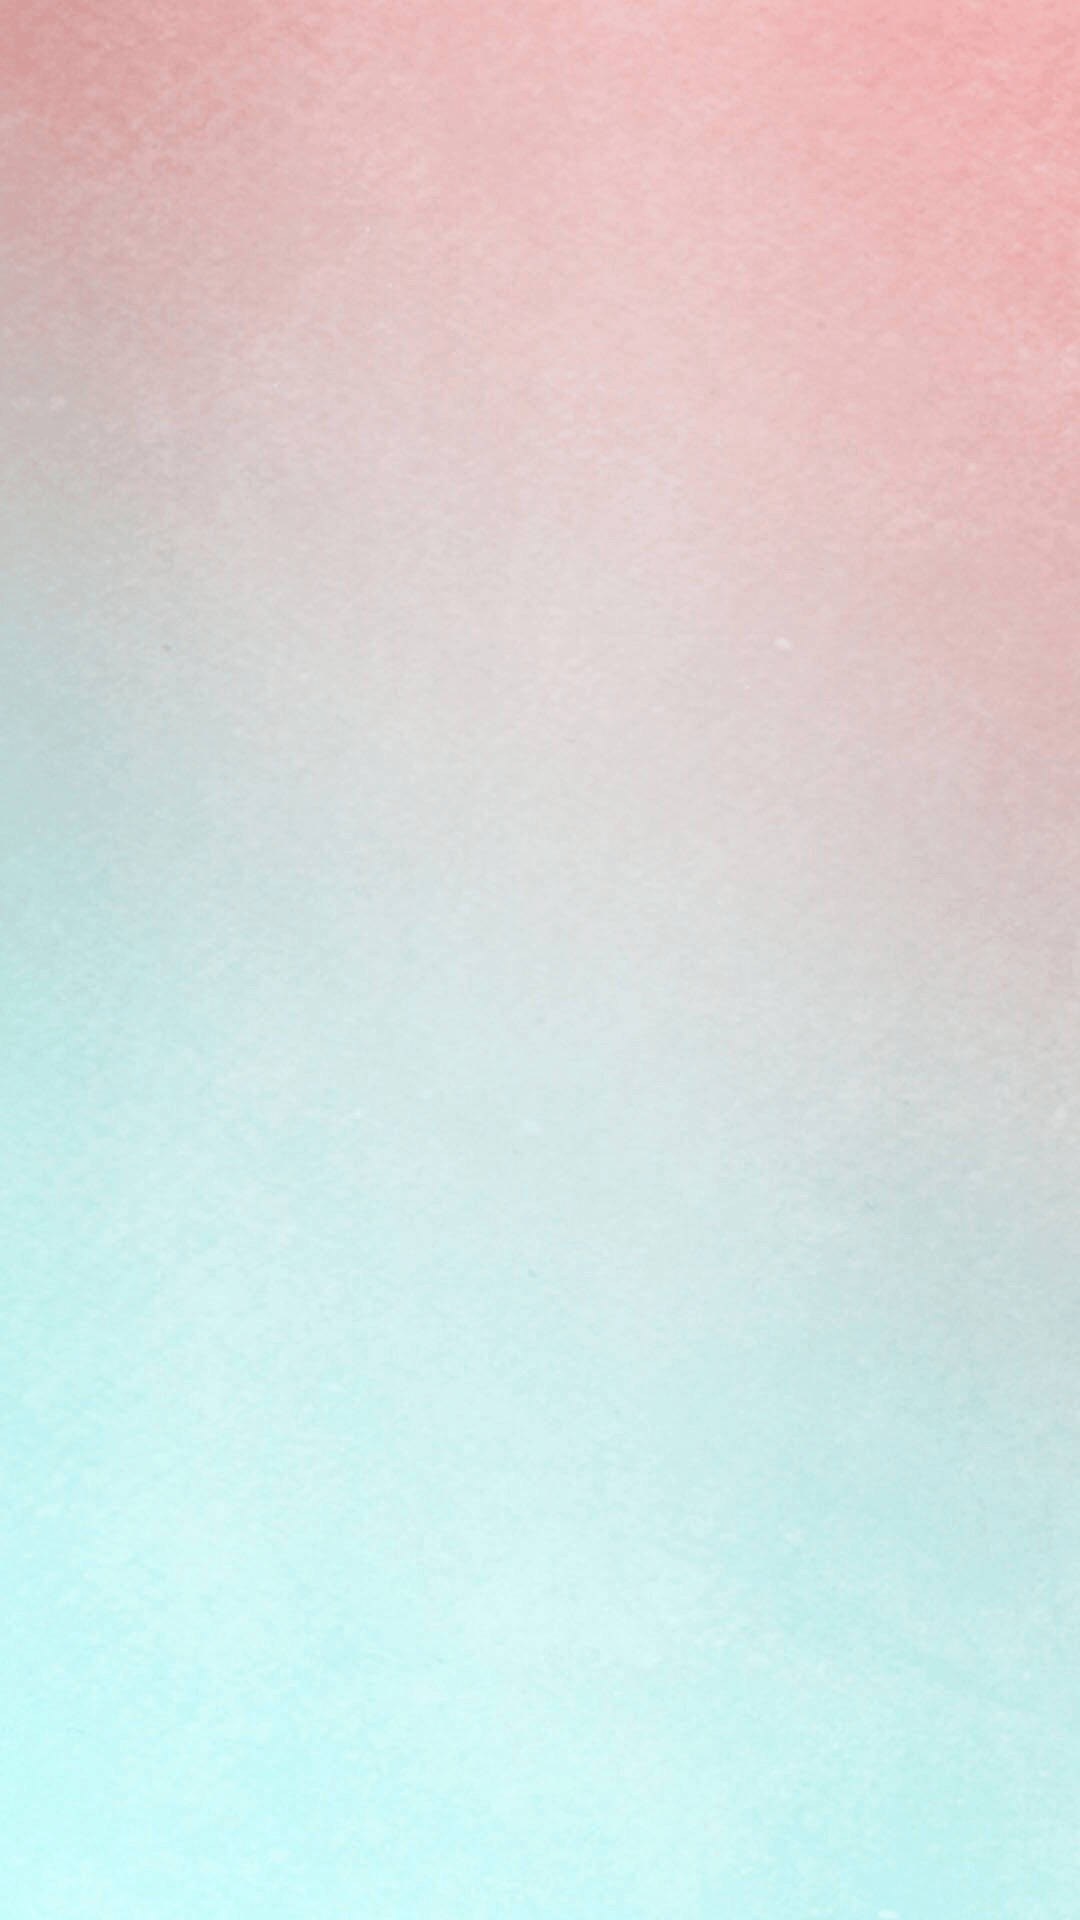 Enjoy the perfect pastel pink and blue hues. Wallpaper